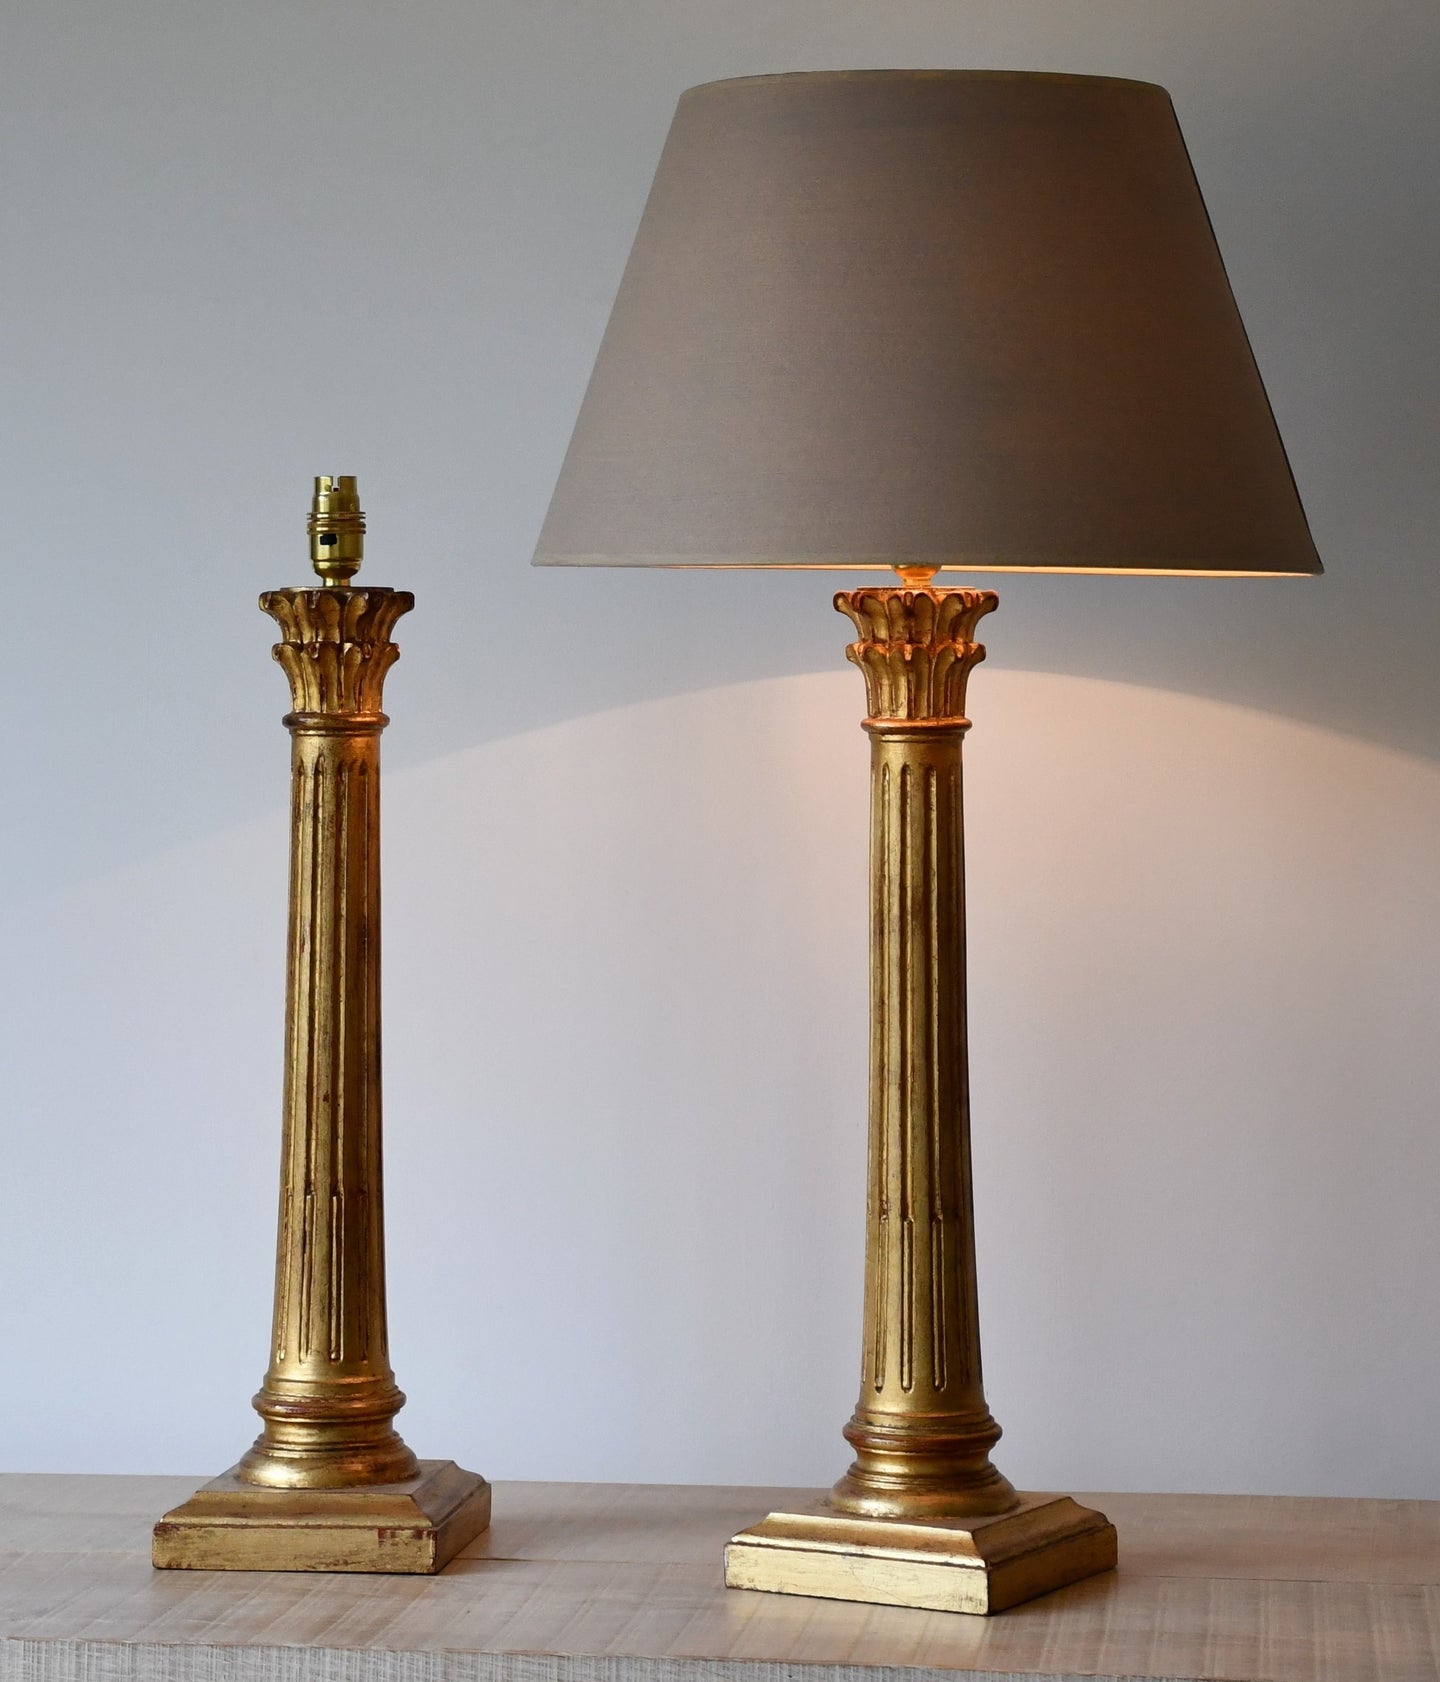 A Pair of Italian Mid 20th Century - Table Lamps